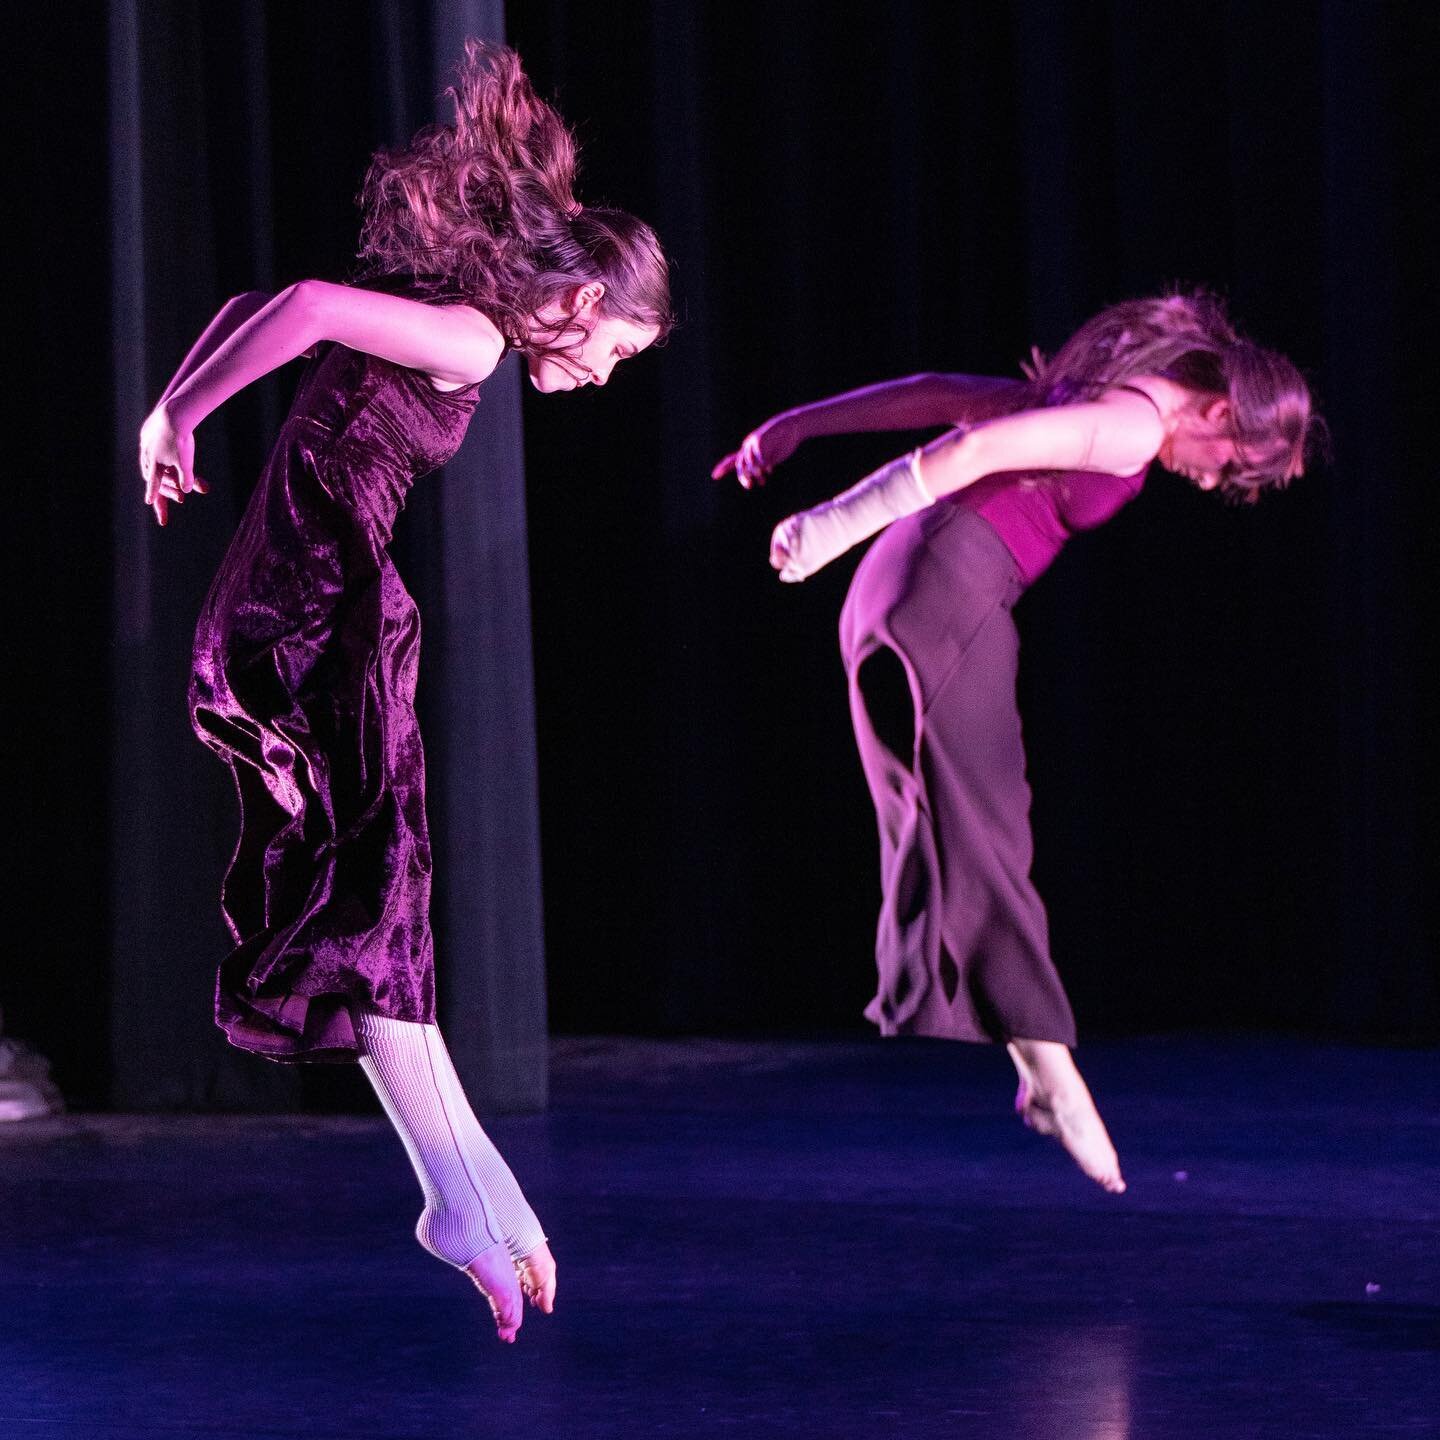 The earthdancers are jumping into their first performance of the weekend tonight!
Where: Place des Arts (27 Larch)
When: 7:30 pm
Why: all ticket sales donated to support environmental causes
.
Hope to see you there!
.
.
.
#dance #sudbury #earthdancer